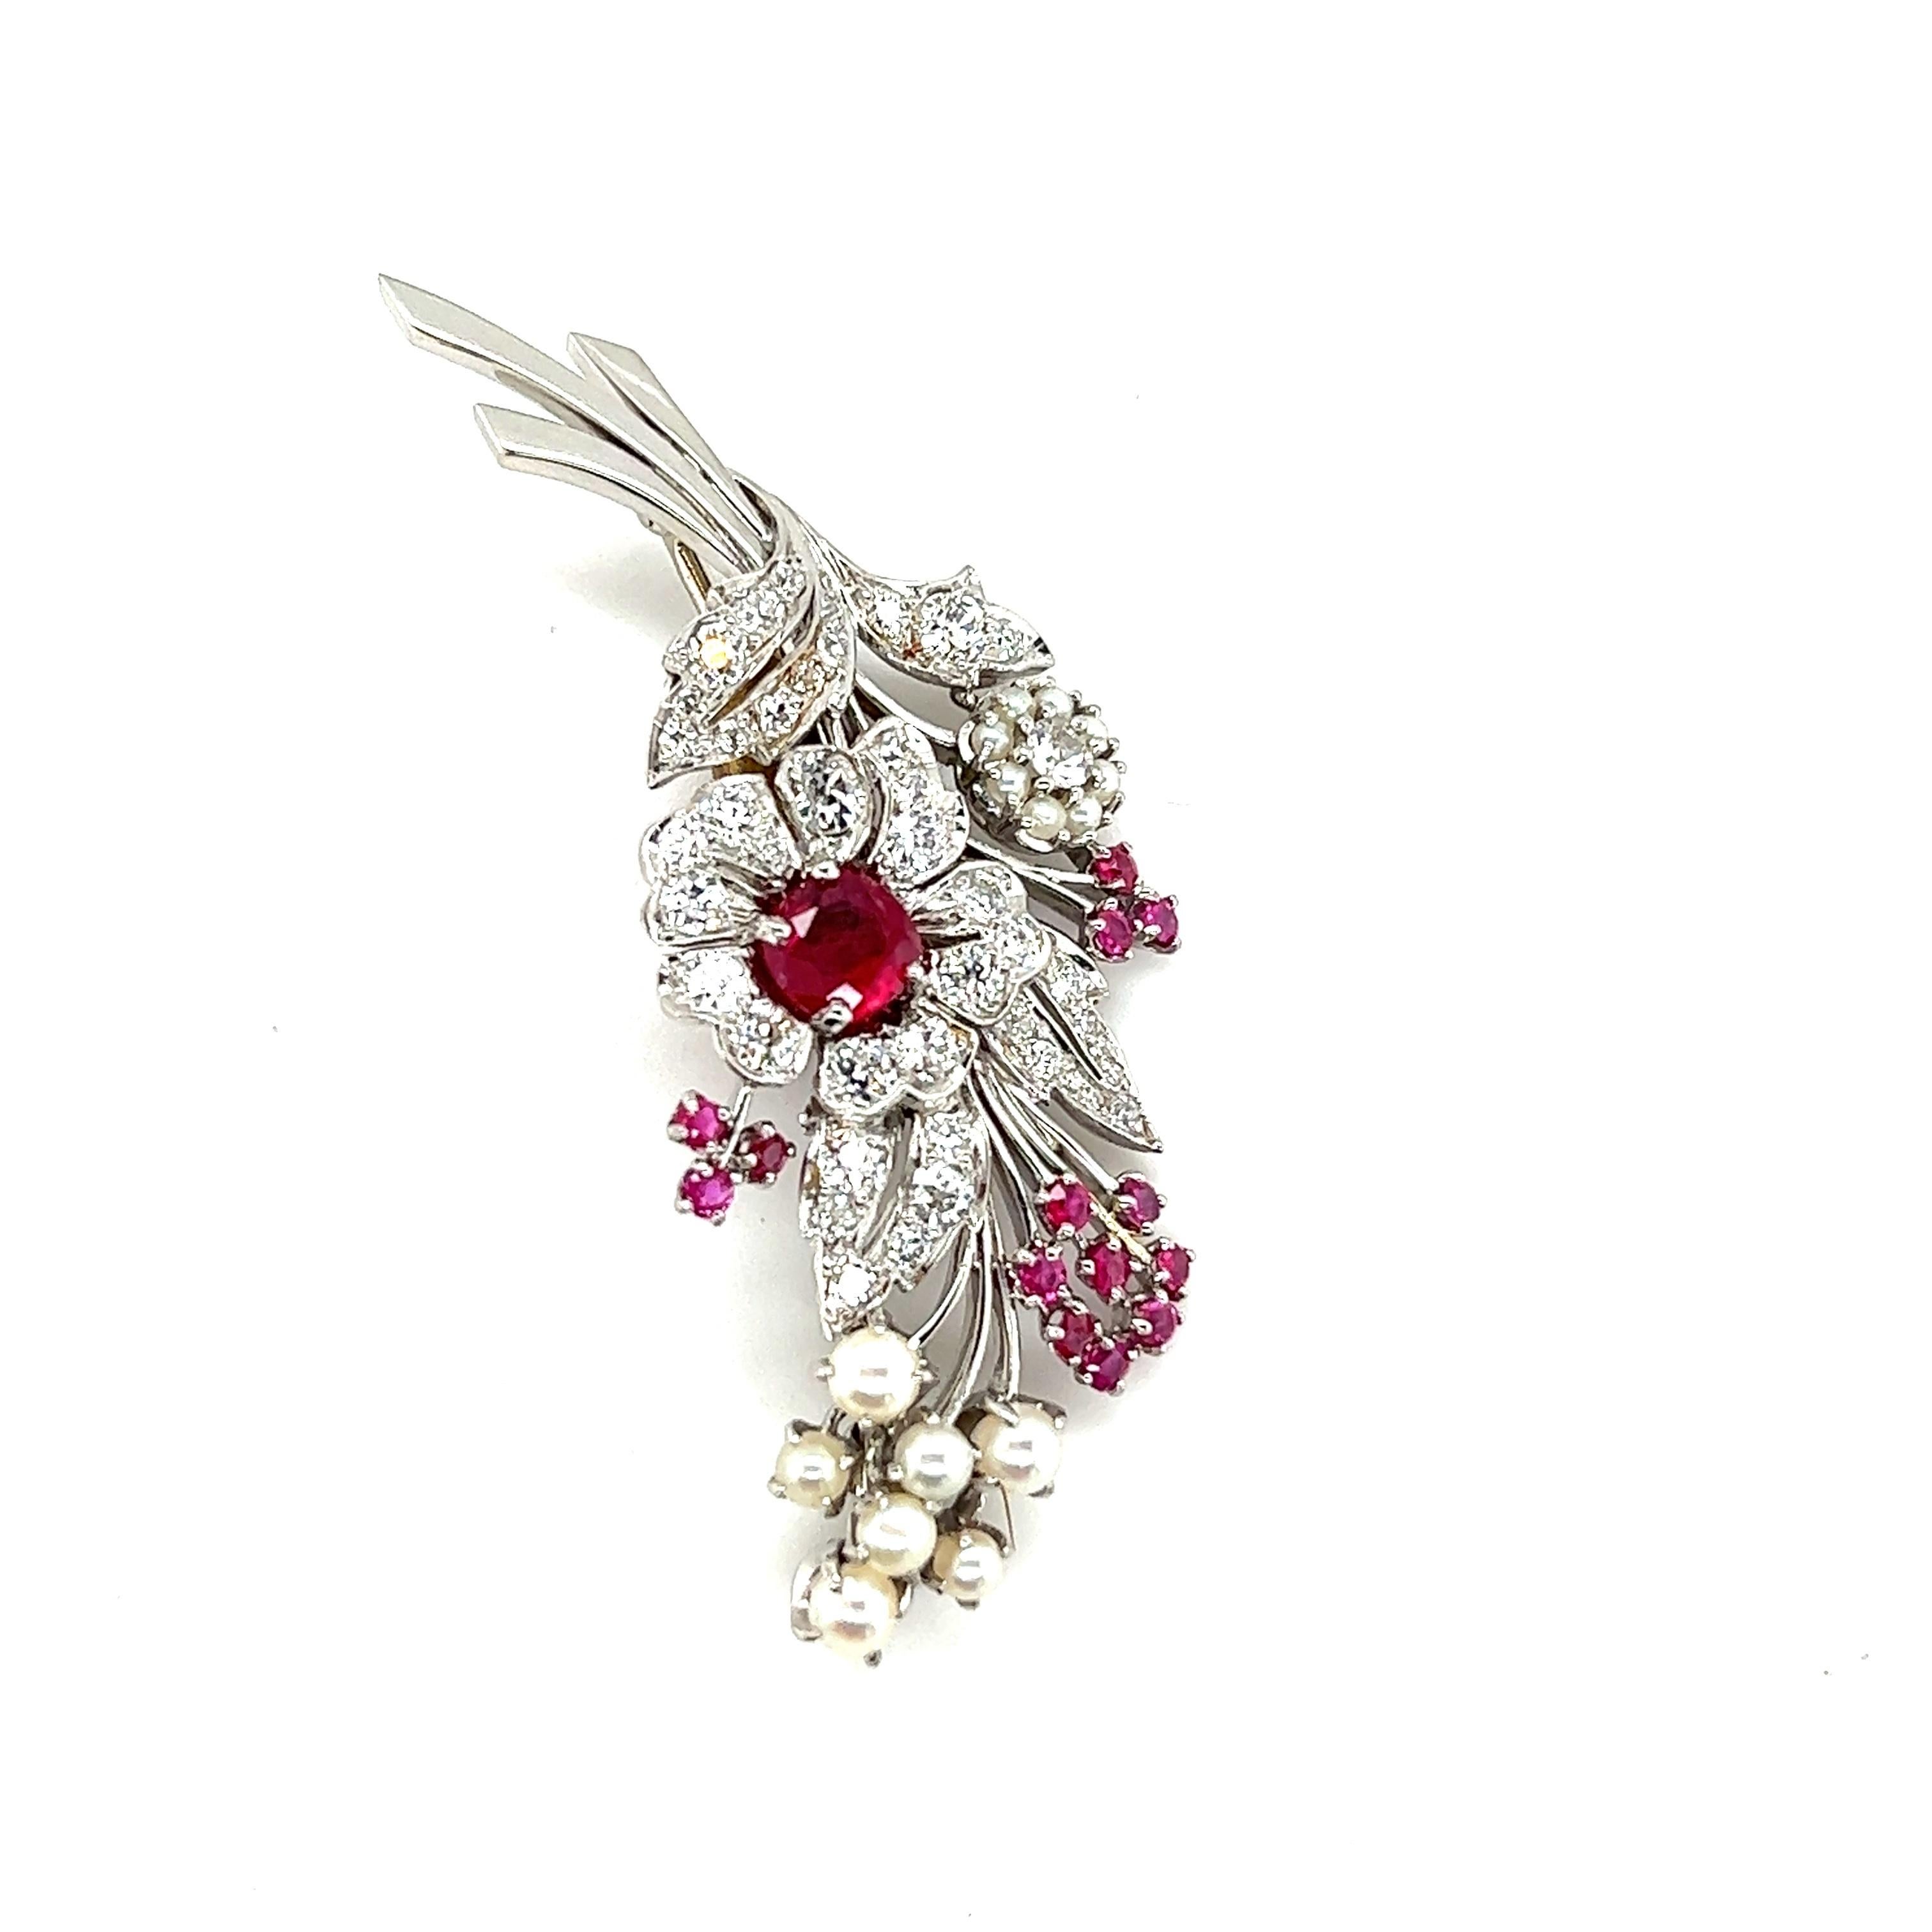 Antique Platinum Ruby, Diamond, and Pearl Spray Brooch, c. 1890 For Sale 2